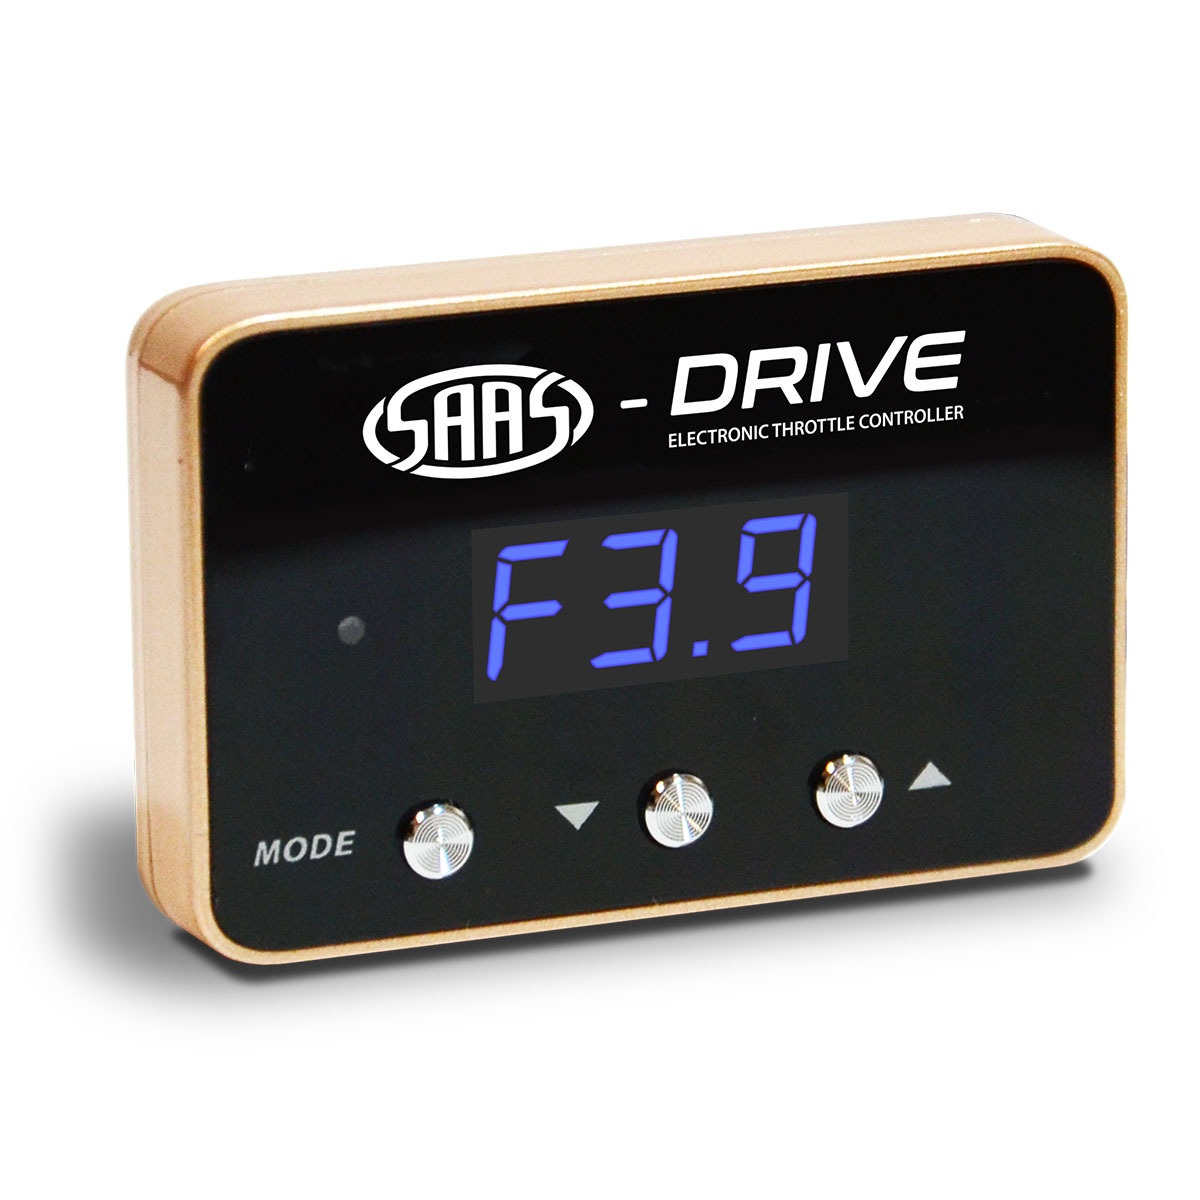 SAAS-Drive Haval H2 Throttle Controller 